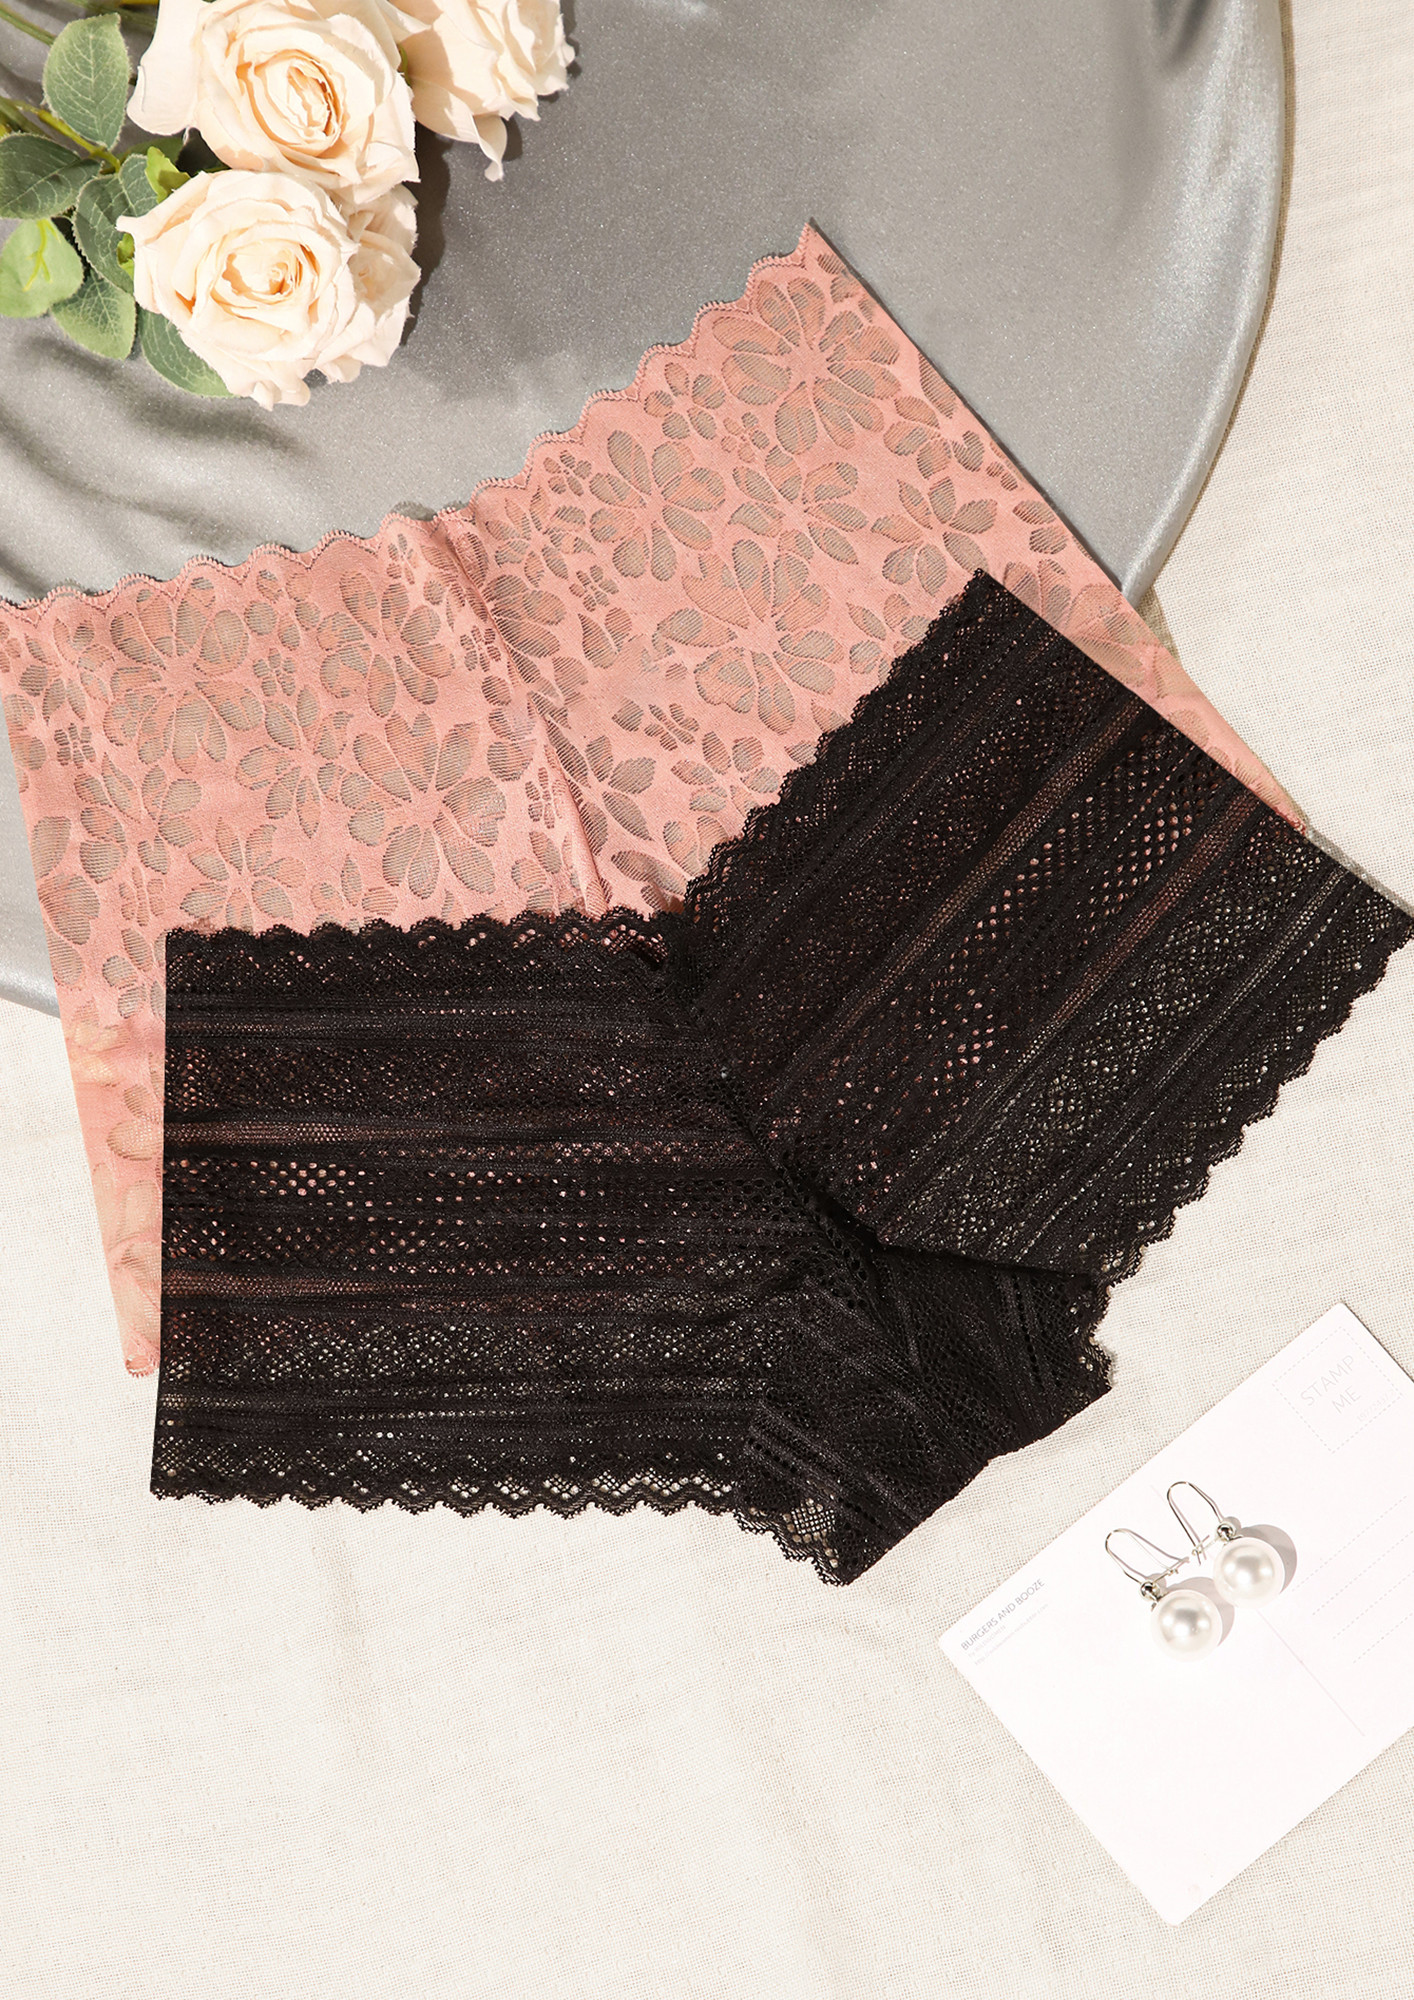 PREMIUM-COMFORT-AND-MOR-MID-RISE, SOLID, PRINTED , LACE-DETAIL, NYLON, PINK AND BLACK, BOYSHORT BRIEF SET (PACK OF 2)